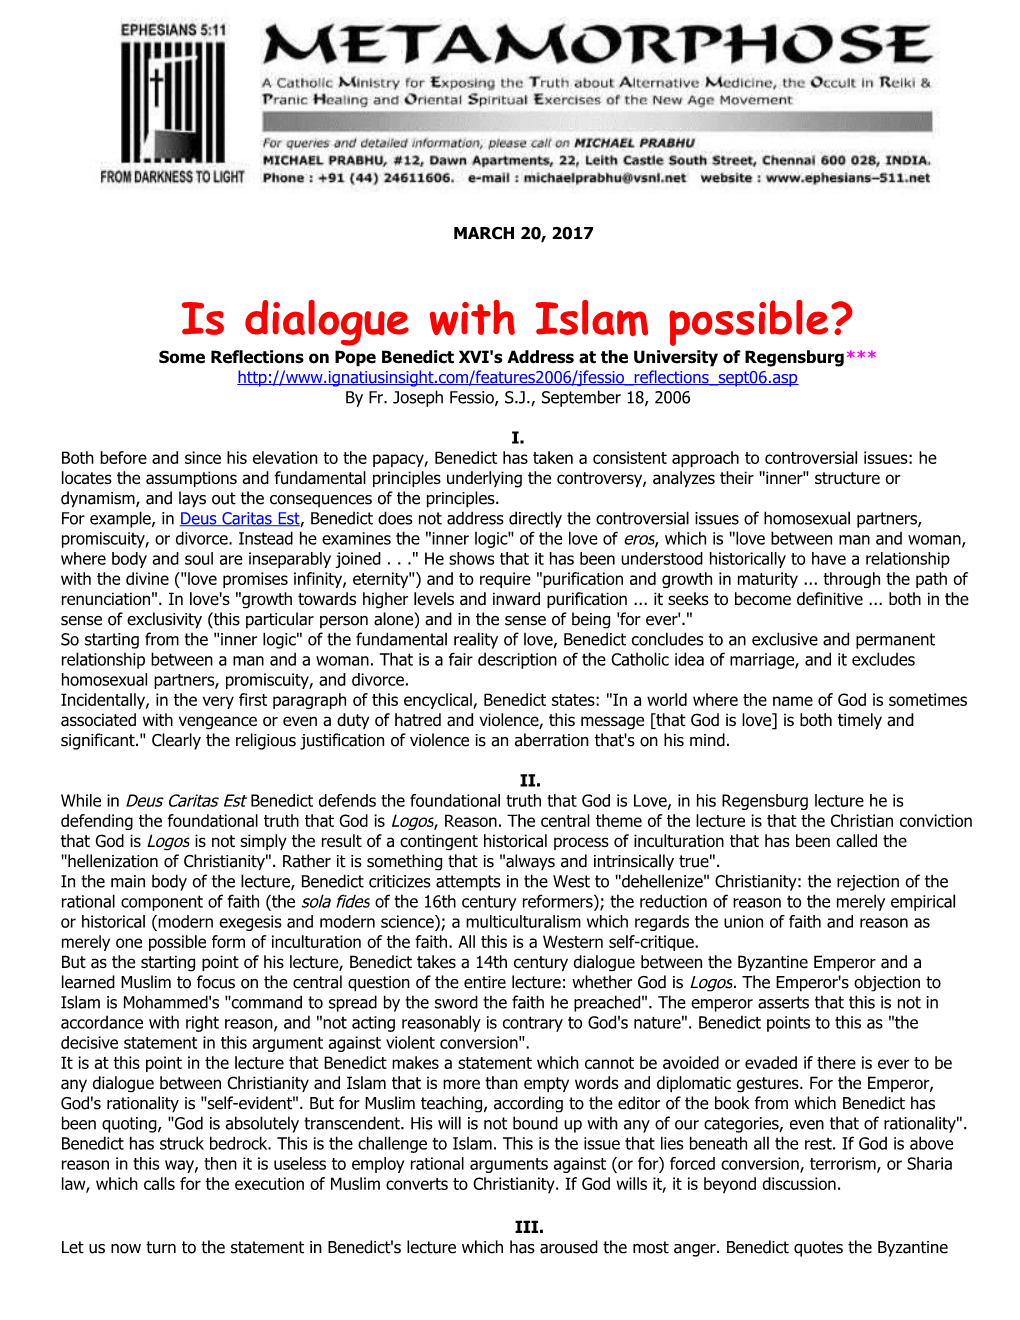 Is Dialogue with Islam Possible?